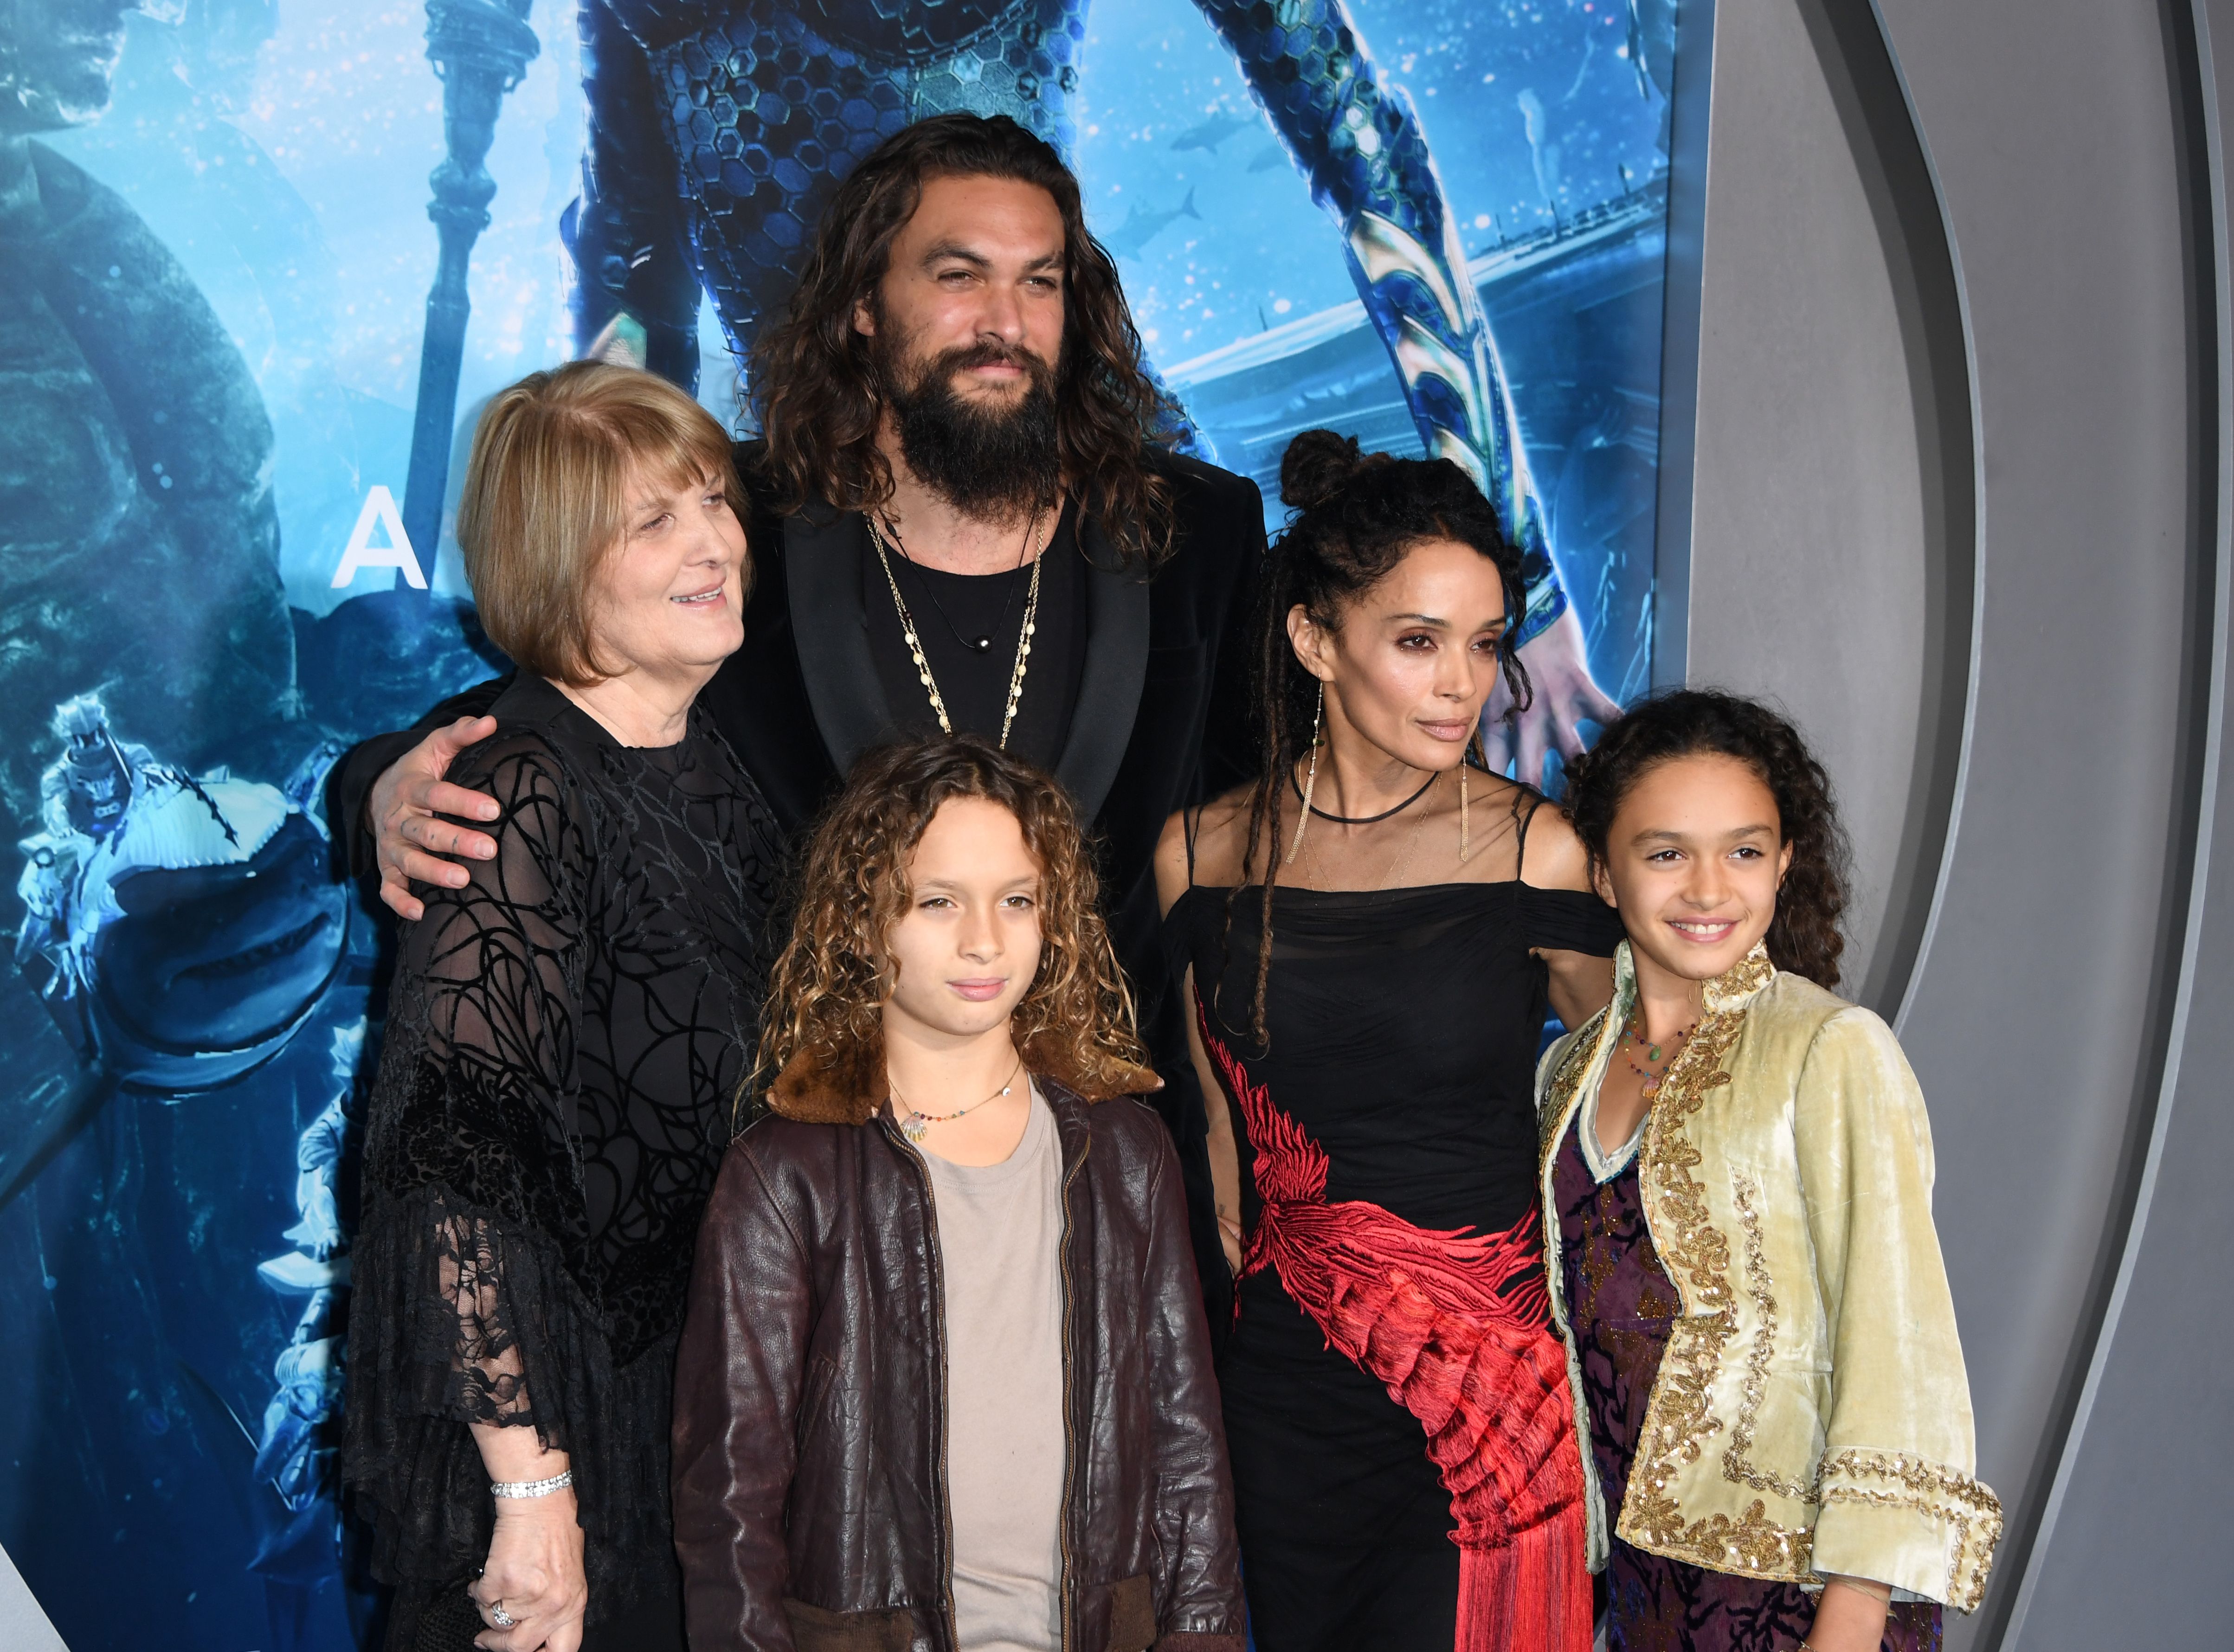 Jason Momoa, his mother, Coni Momoa, his son Nakoa-Wolf, his wife Lisa Bonet and daughter Lola during the world premiere of "Aquaman" in Hollywood, California on December 12, 2018 | Source: Getty Images